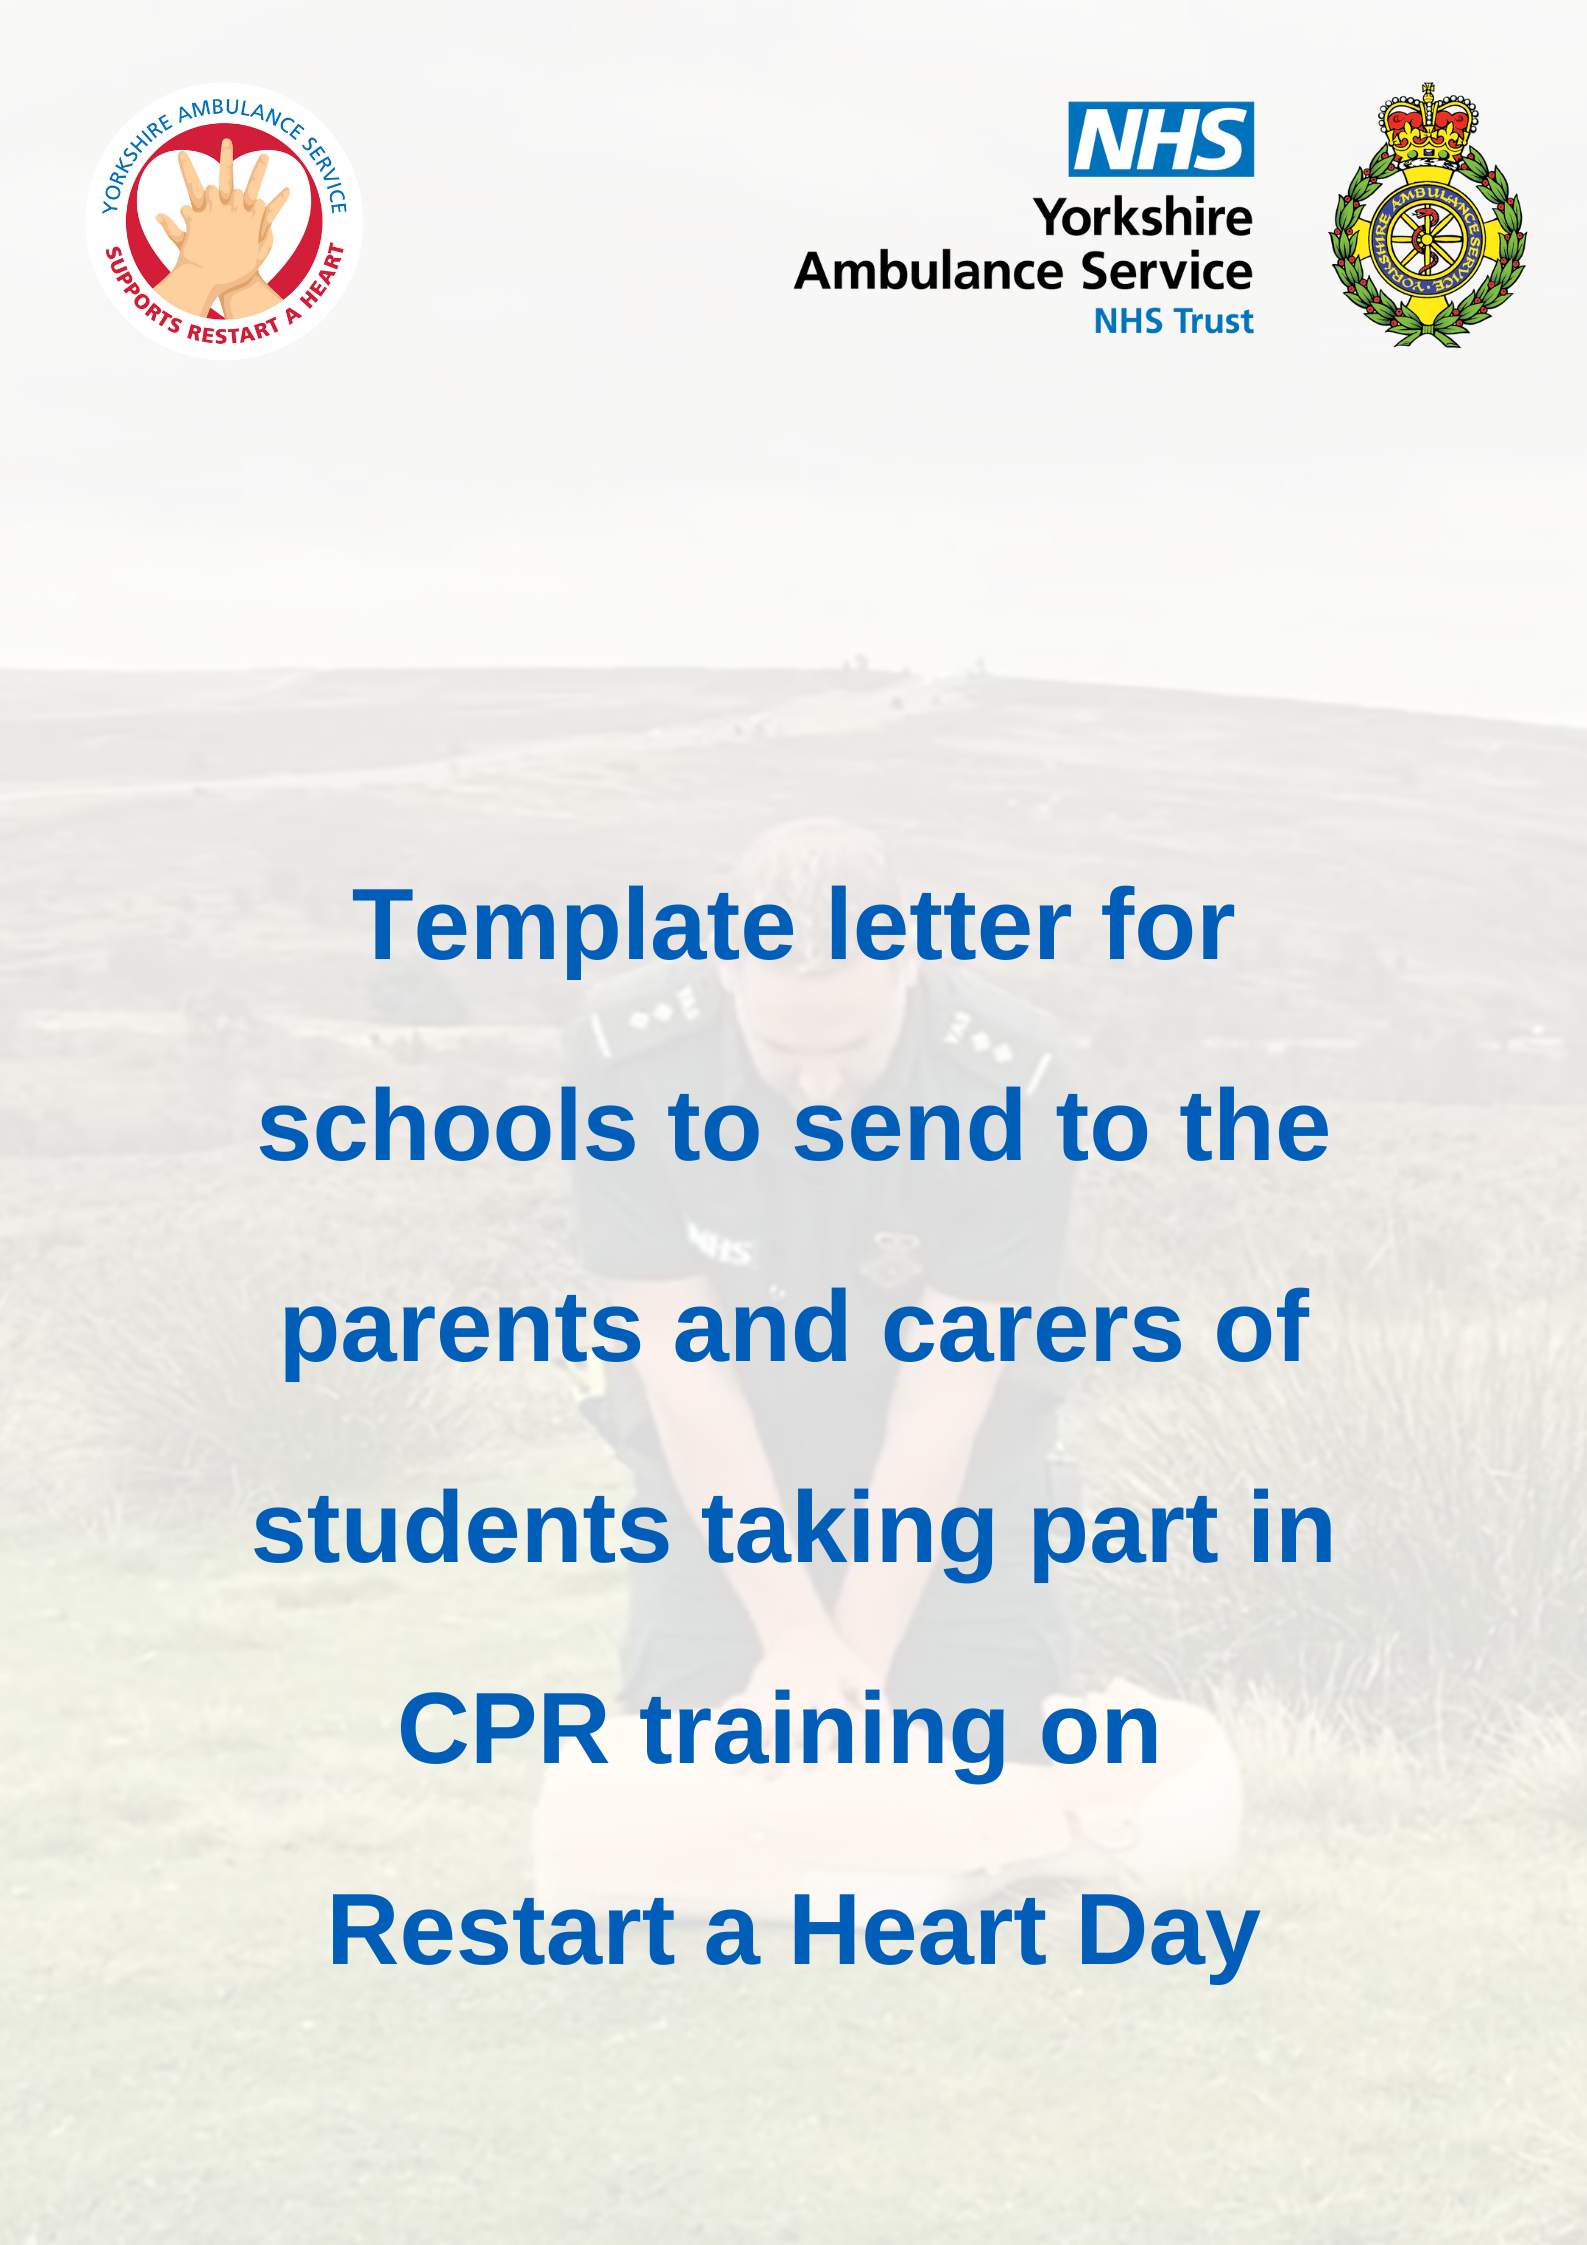 Template letter for parents of students taking part in Restart a Heart Day 